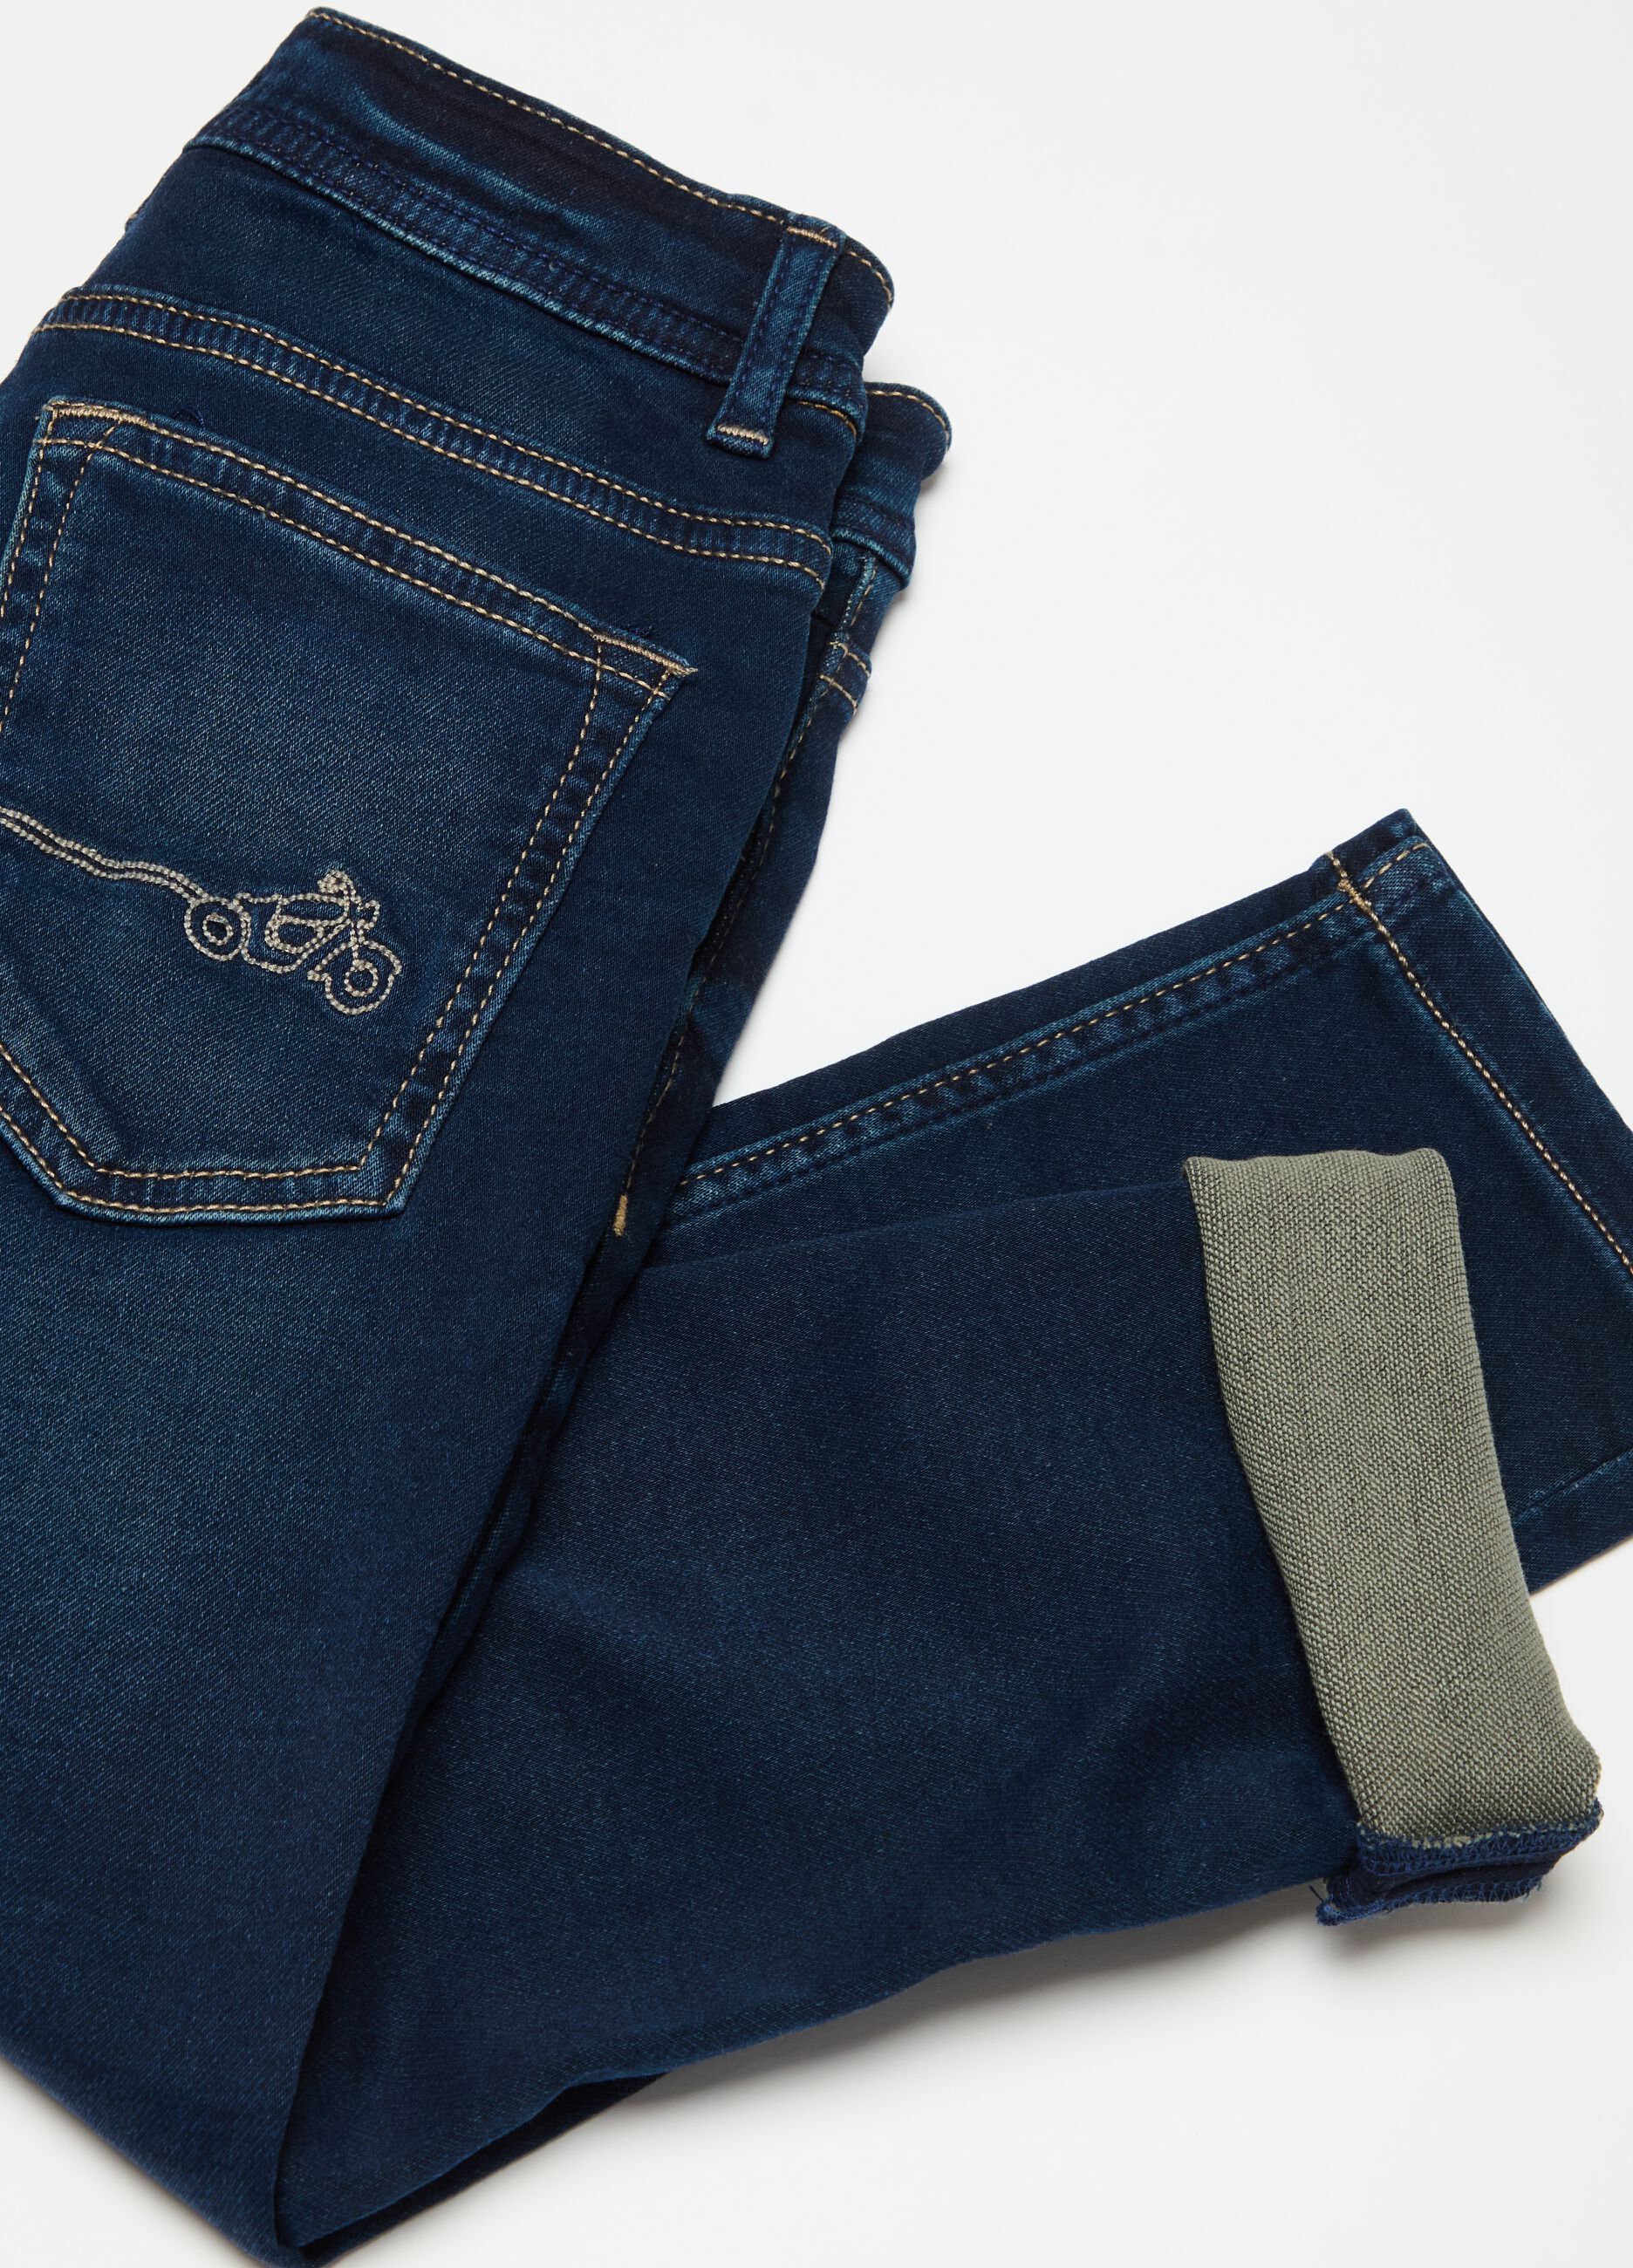 Jeans regular fit patch e ricamo motorcycle